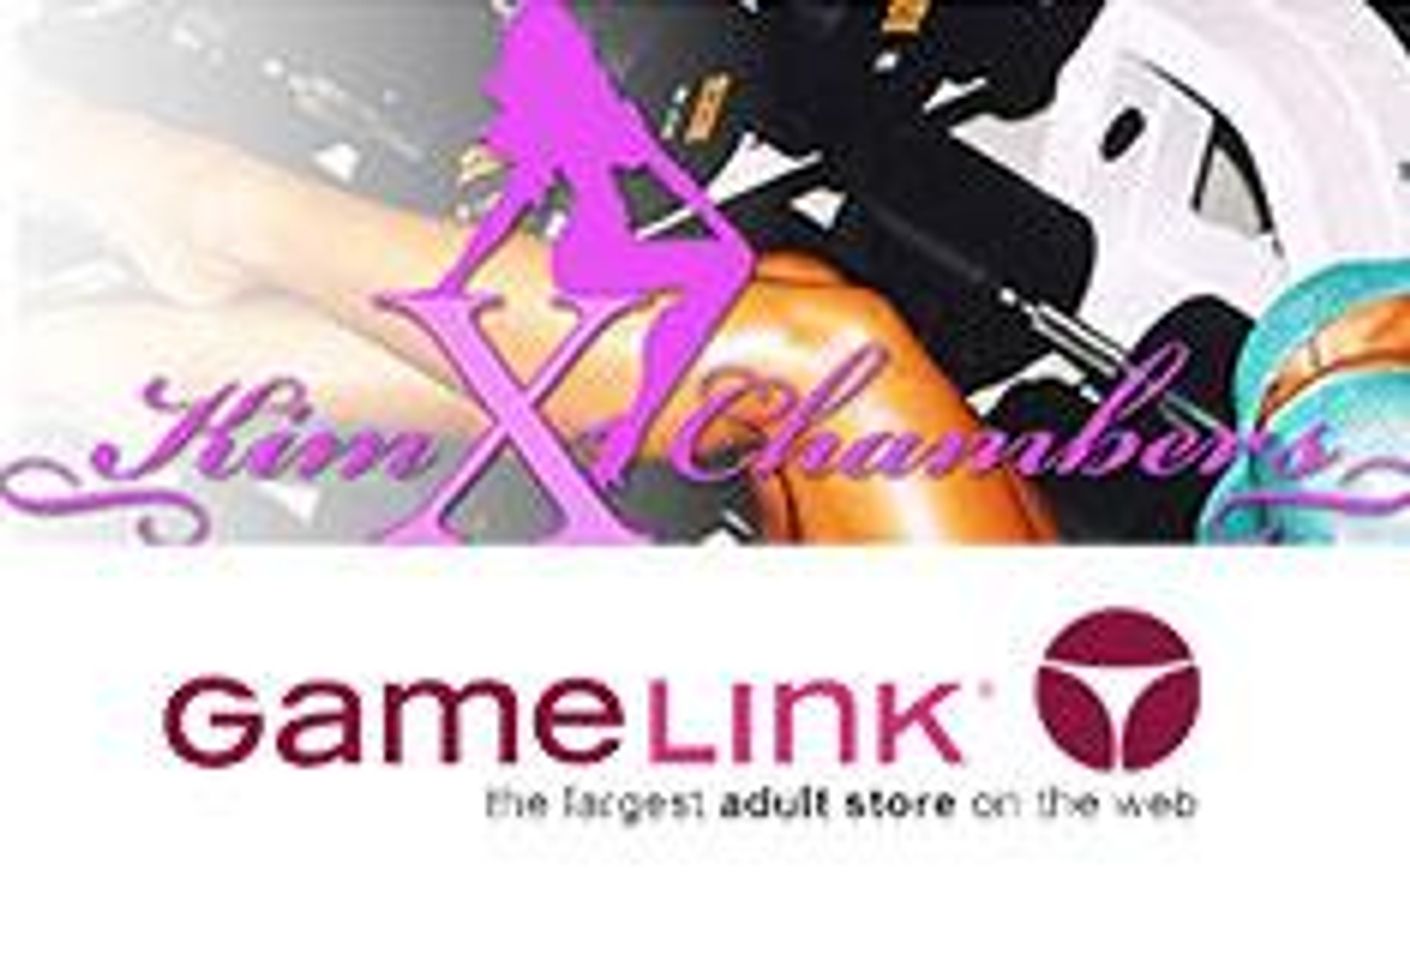 Kim Chambers Partners With GameLink.com